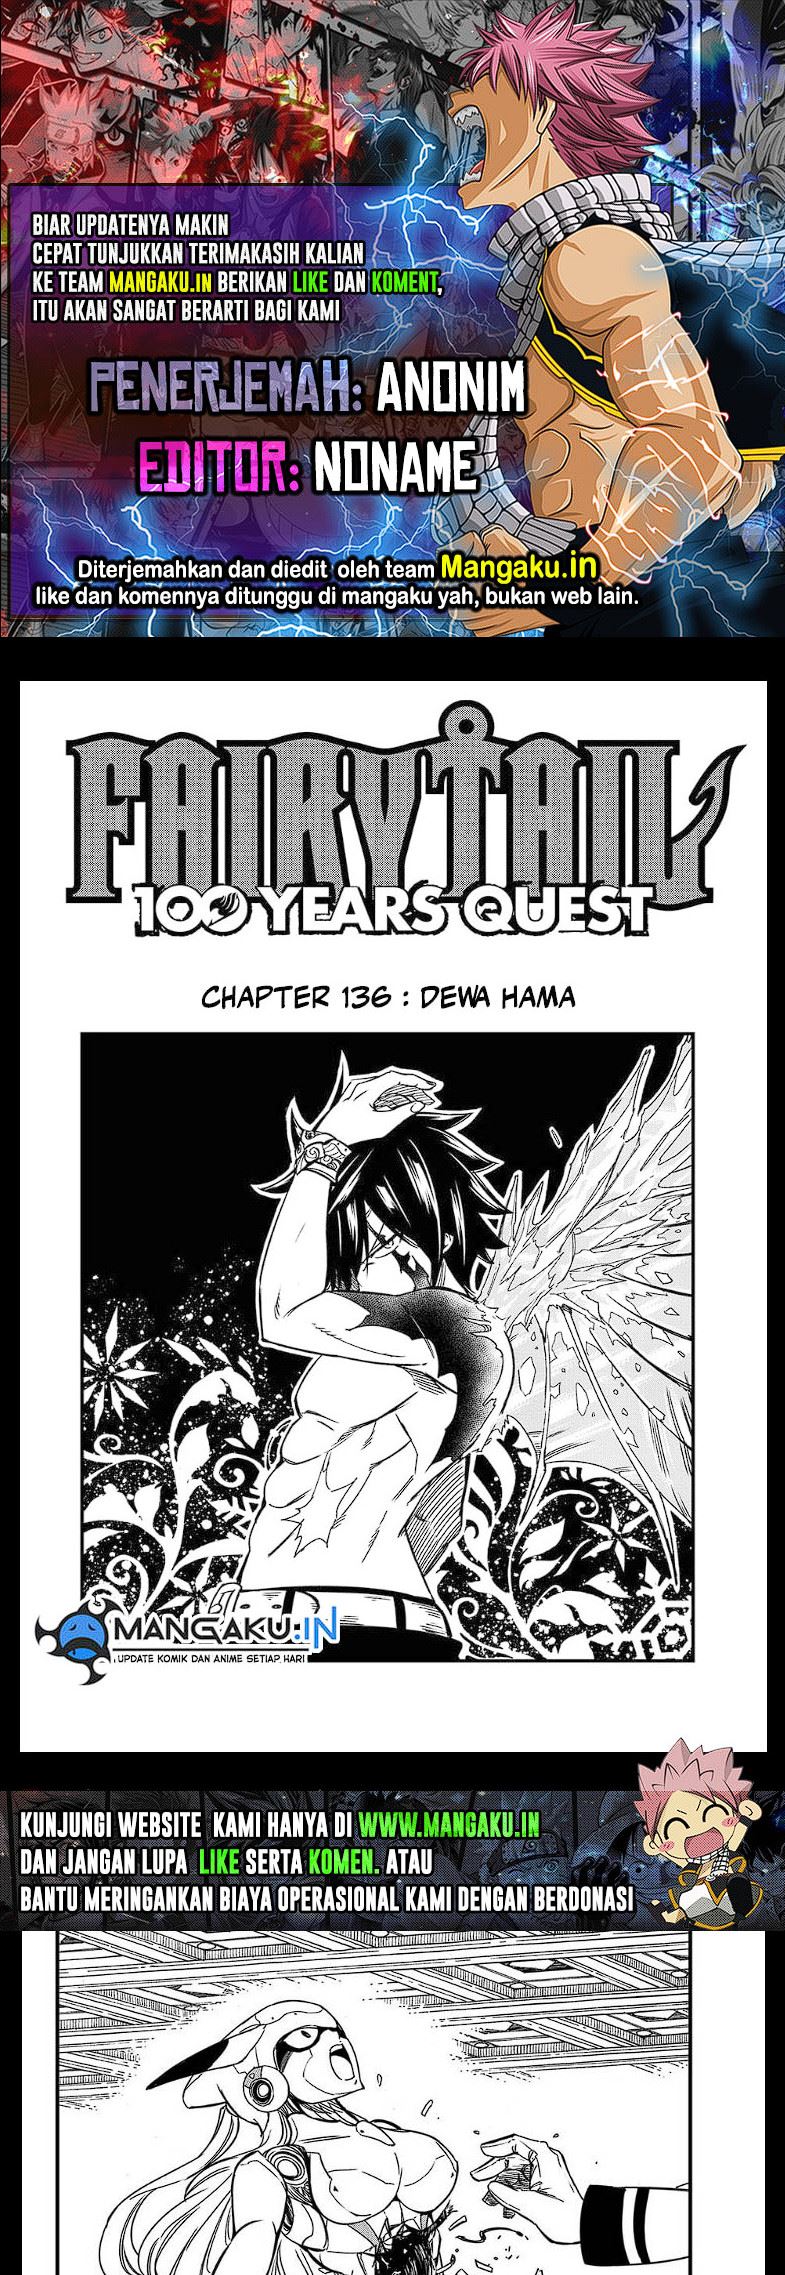 Fairy Tail 100 Years Quest Chapter 136